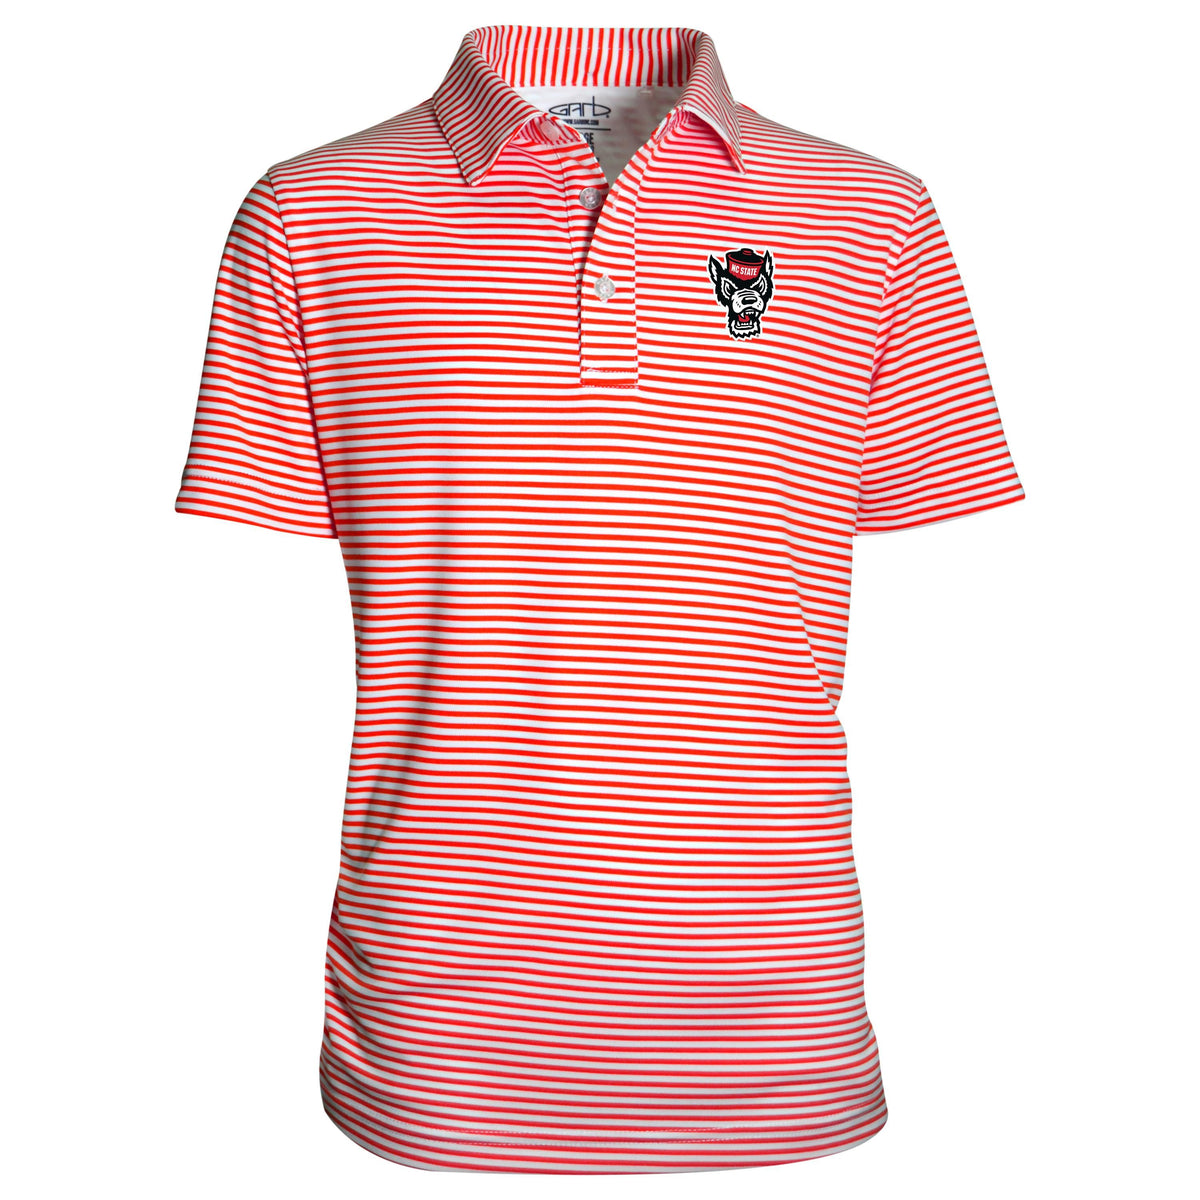 NC State Wolfpack Youth Boys' Polo